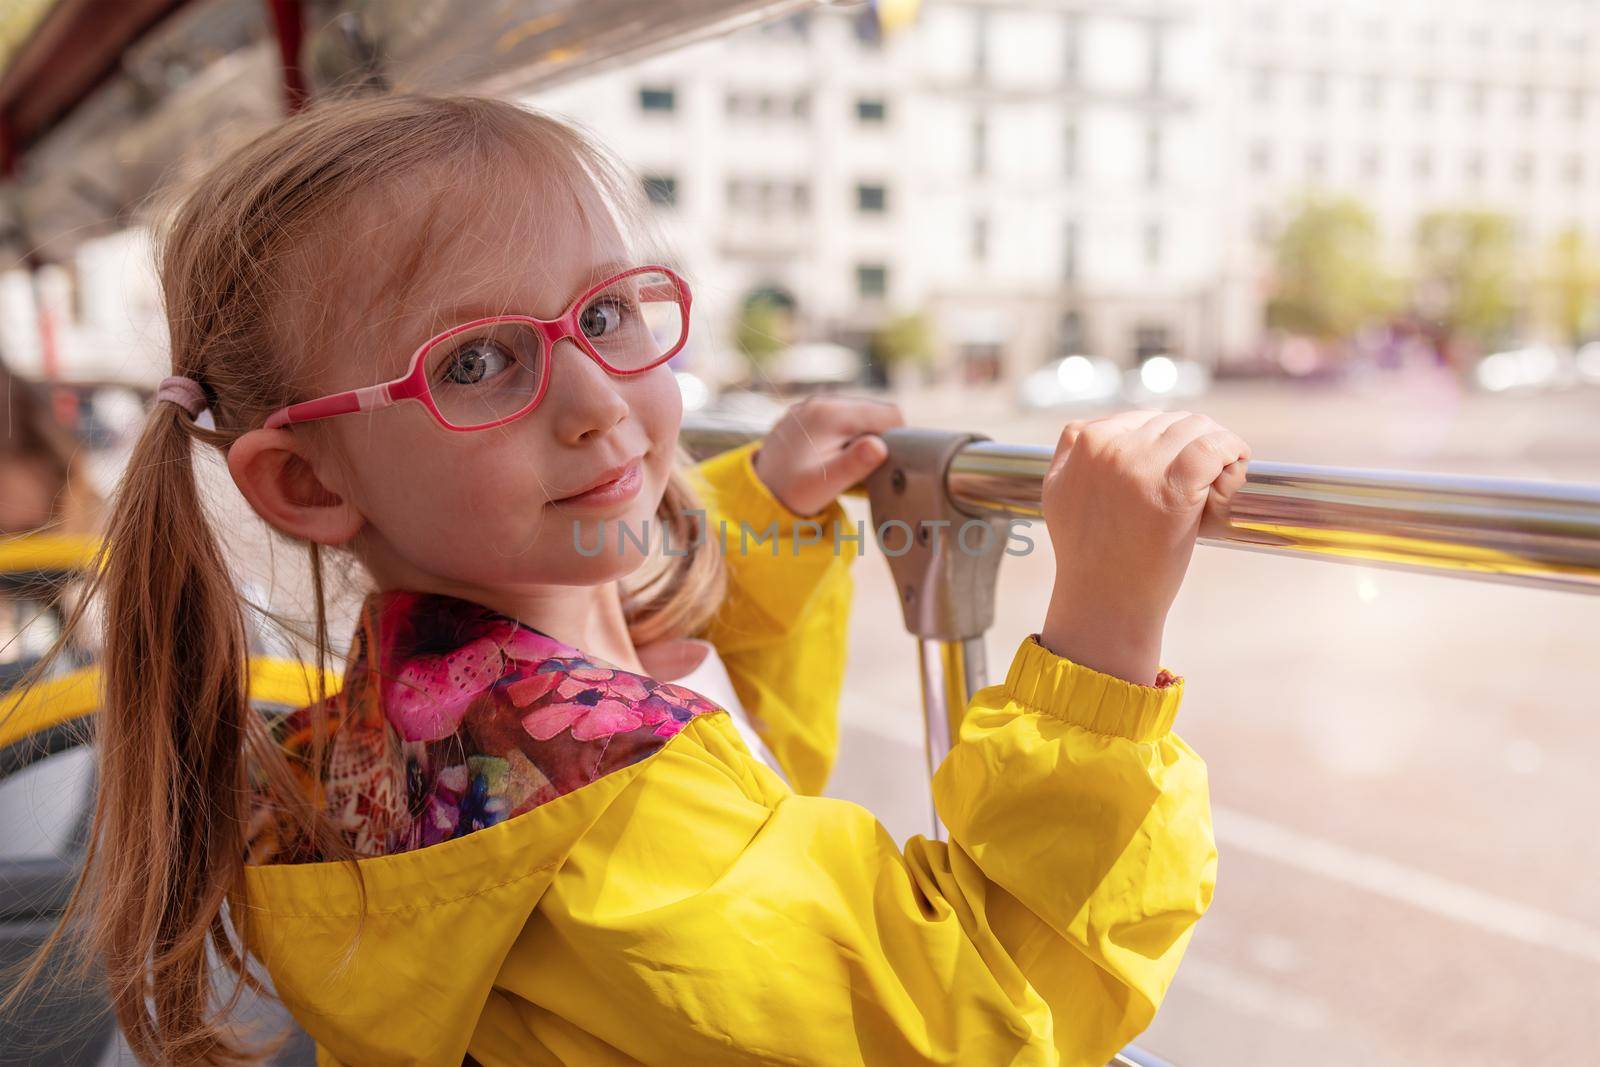 A little blonde girl of European appearance in eyeglasses. The child rides in a school bus, looks at the camera and smiles. Children's health concept. vision problems, astigmatism, nearsightedness